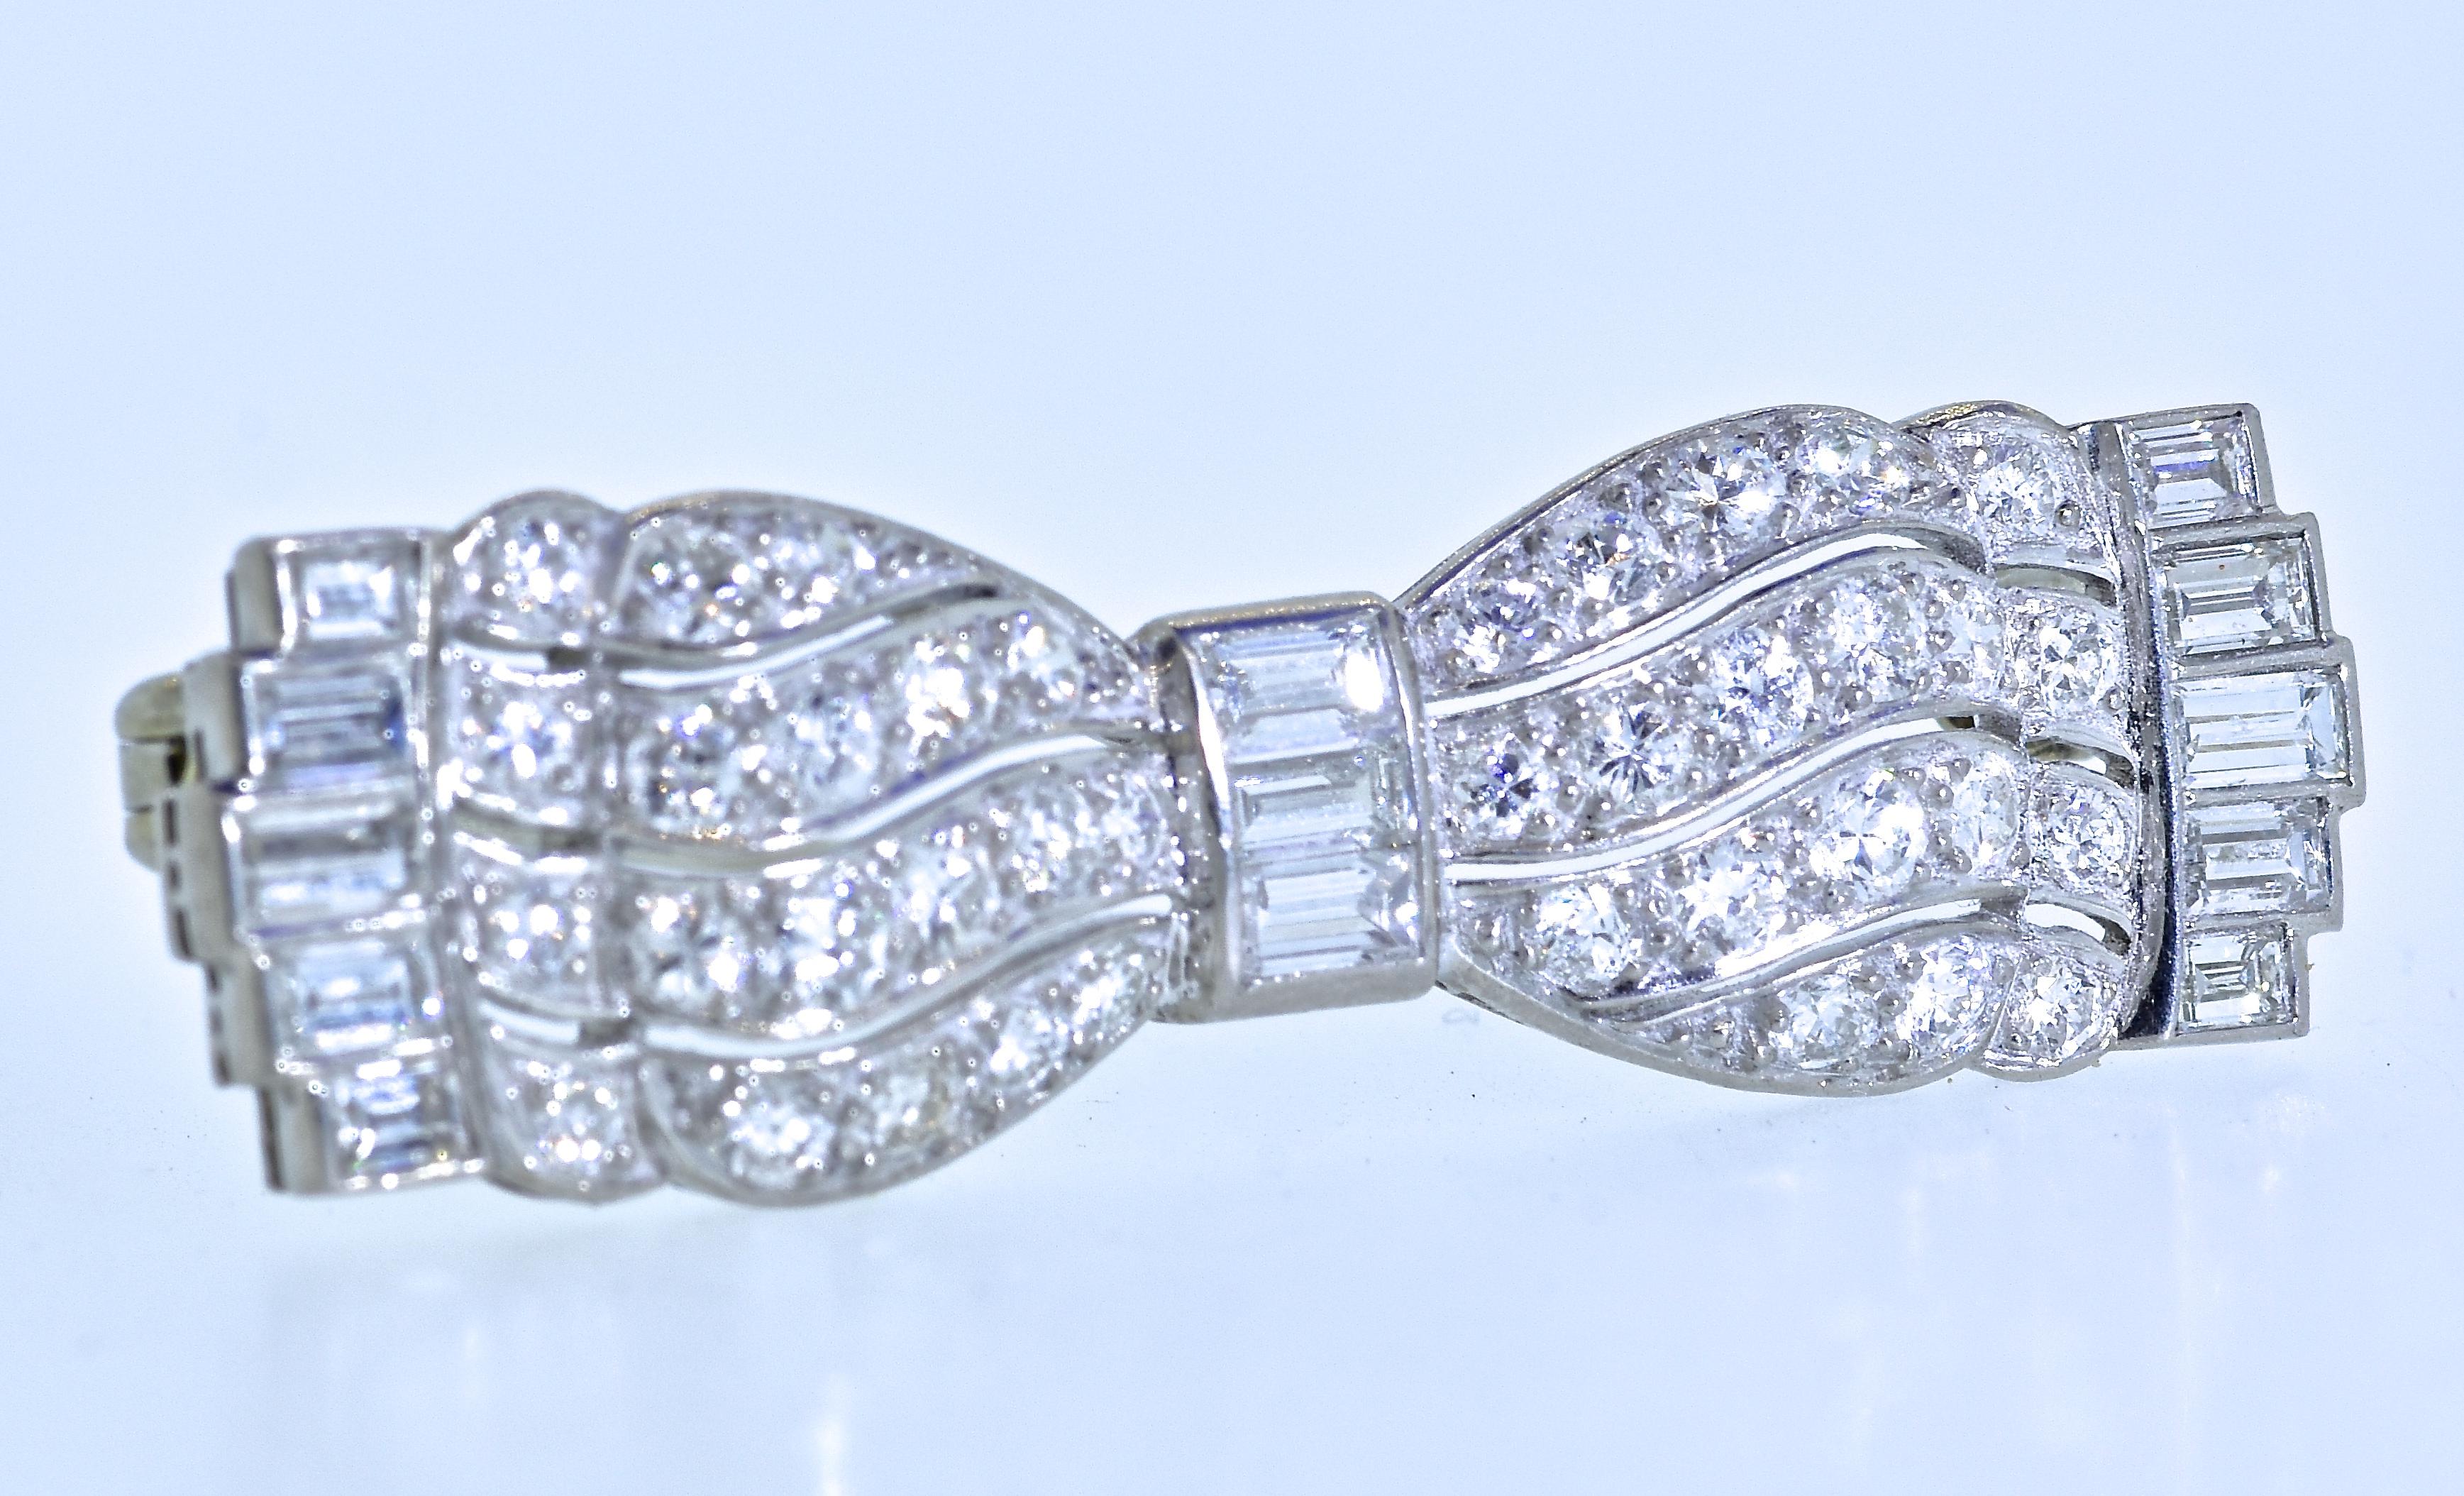 Art Deco brooch in the motif of a bow-tie.  This small masterpiece possesses an estimated 1.50 cts of very fine white diamonds.  There are 51 diamonds, 38 round brilliant cut and 13 long baguette cut diamond.  All the stones are well cut, well set